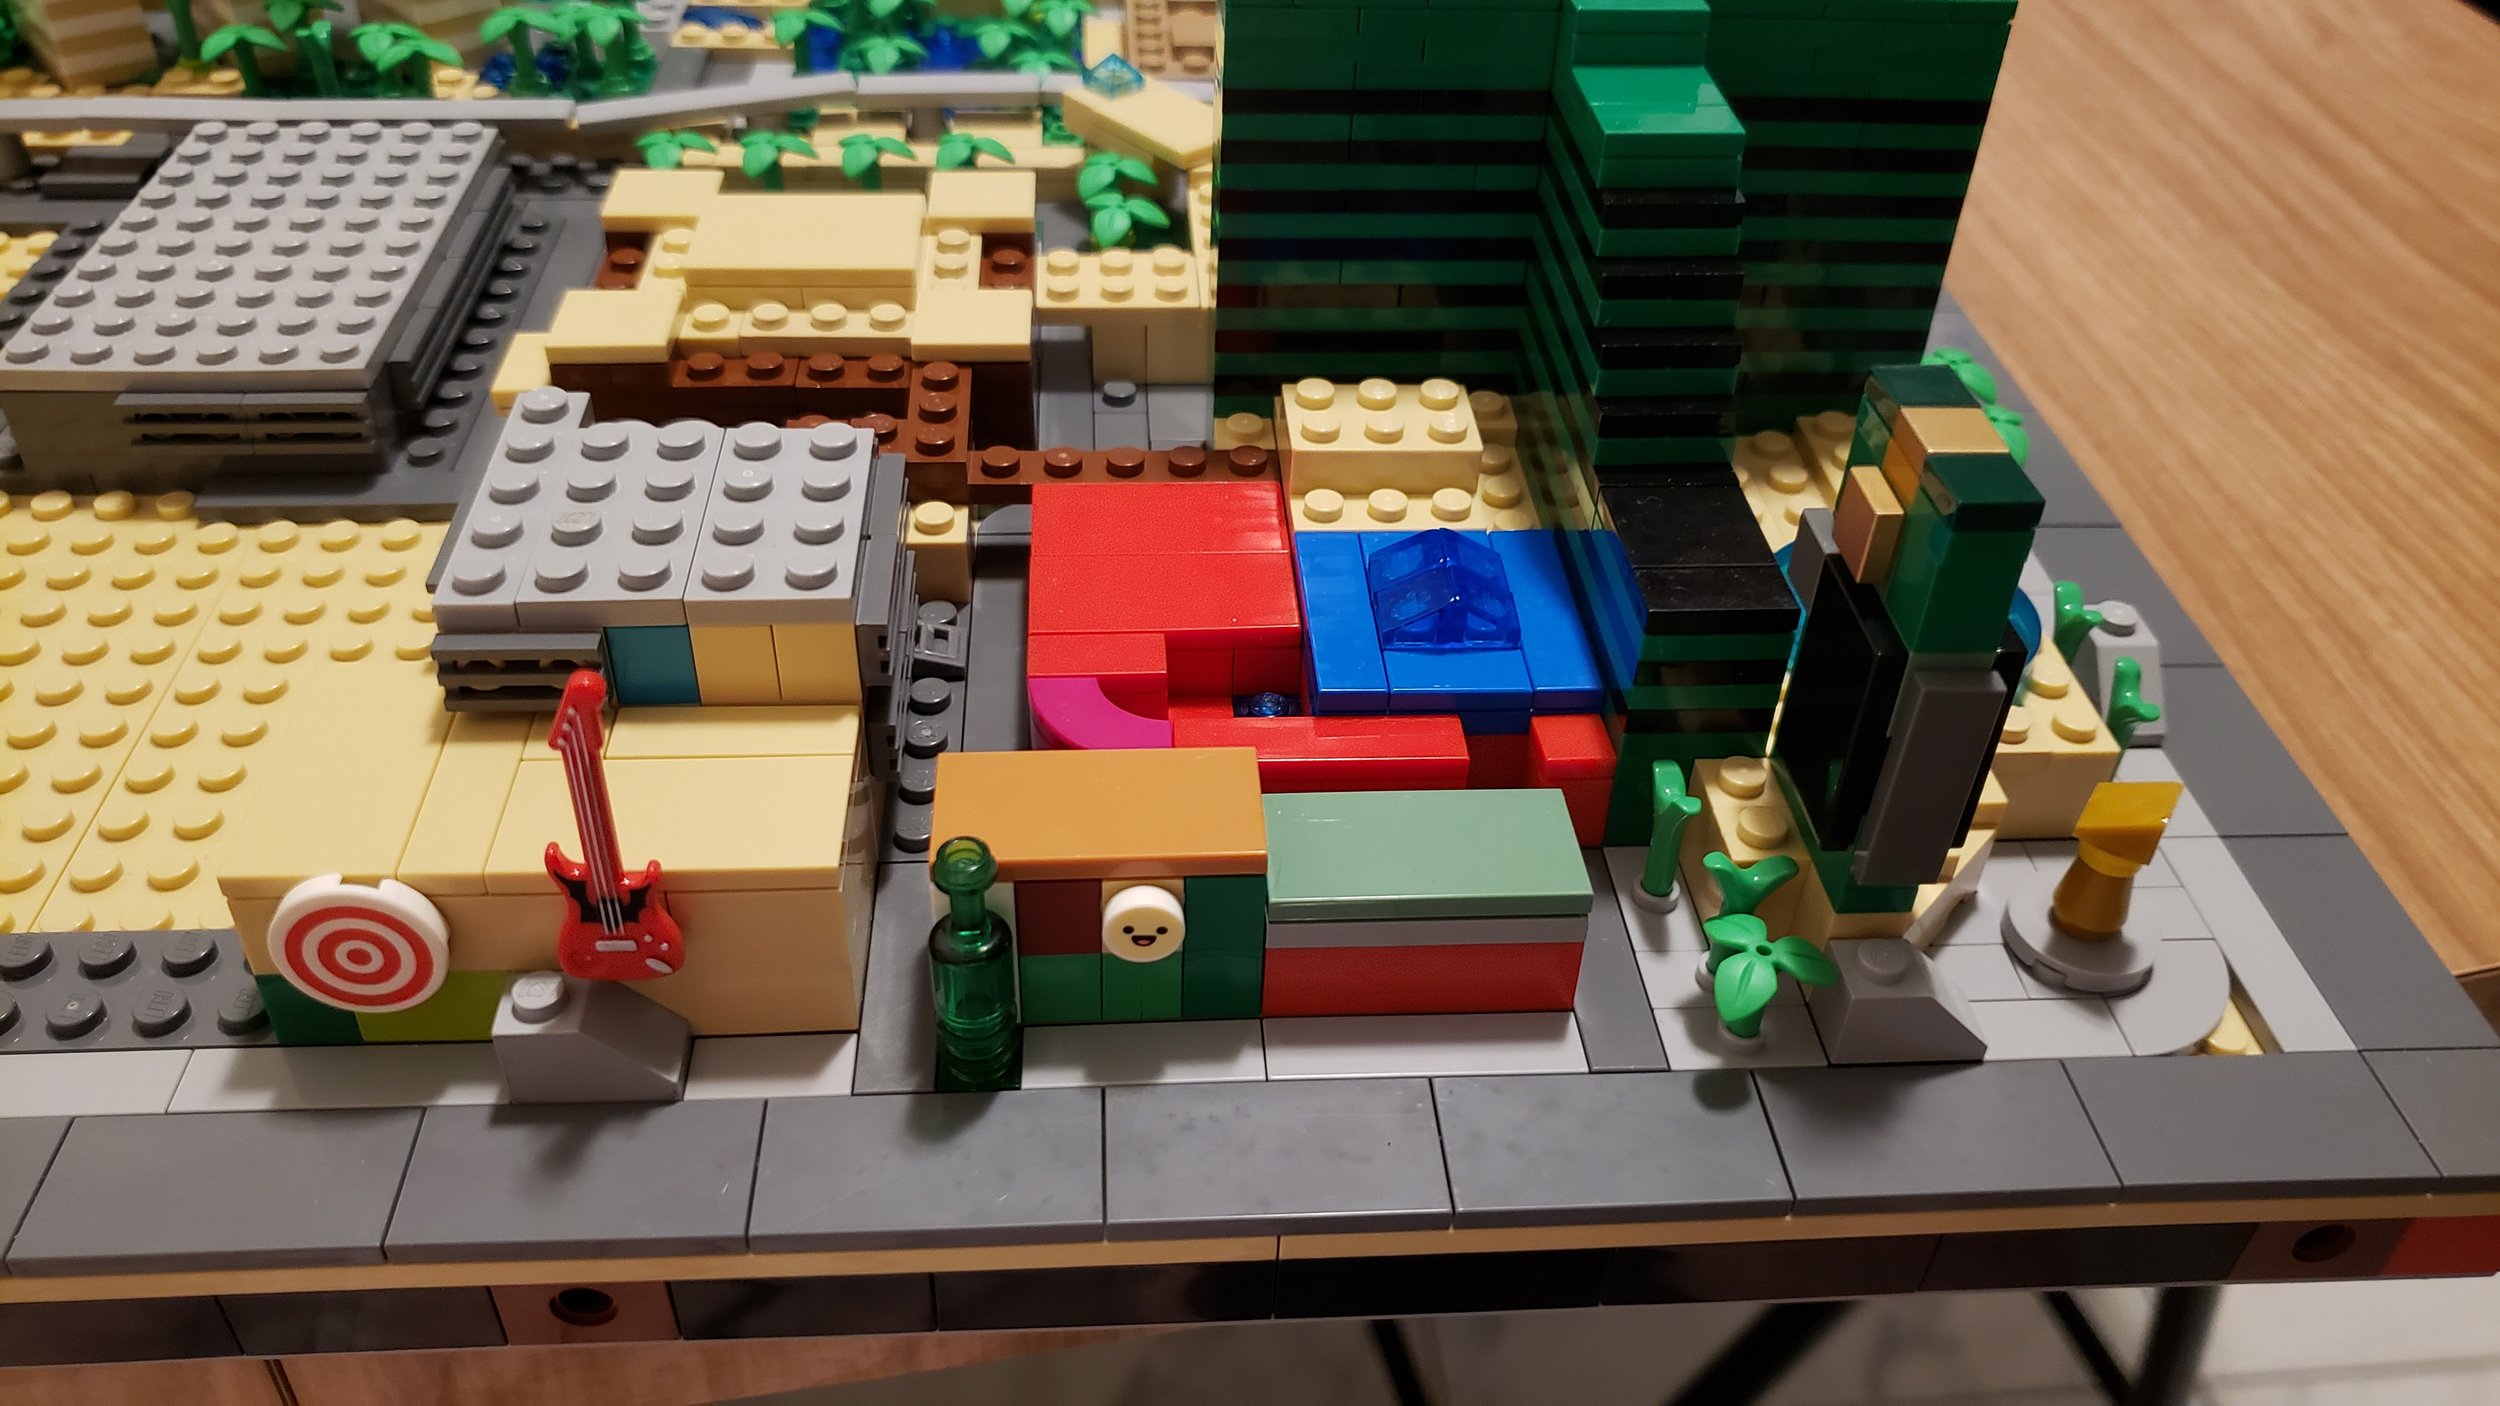 LEGO Las Vegas Strip: The Past, Present and Future of Microscale